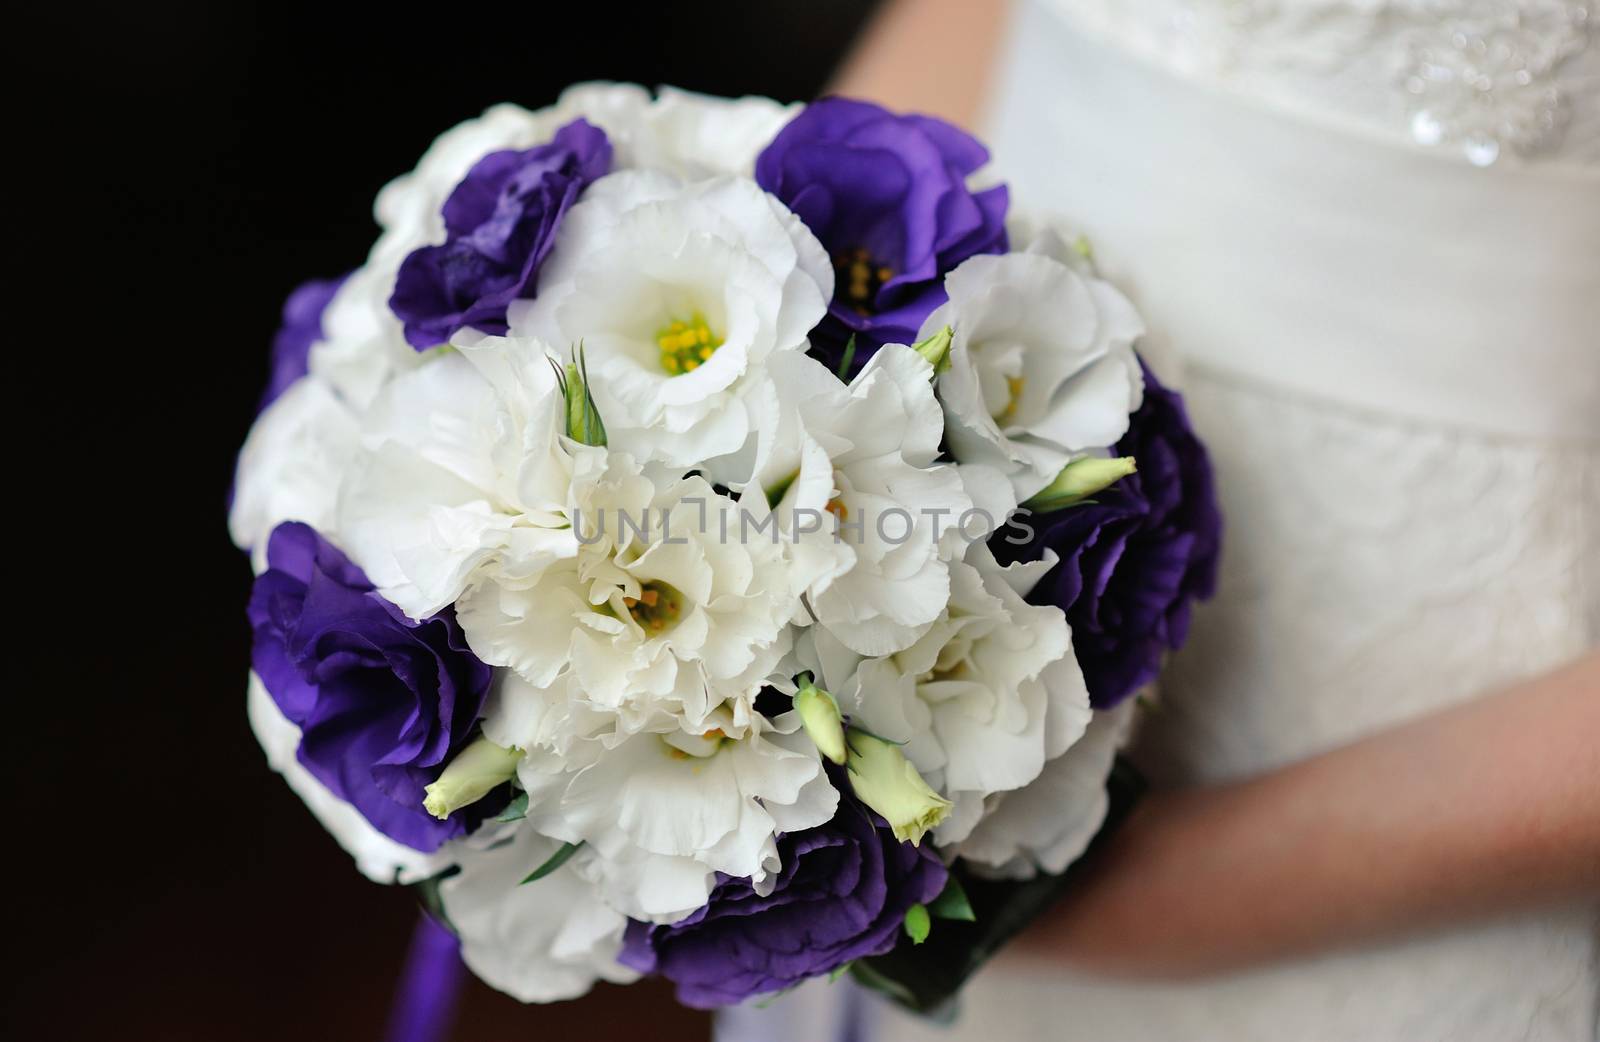 Bride holding beautiful wedding bouquet by timonko